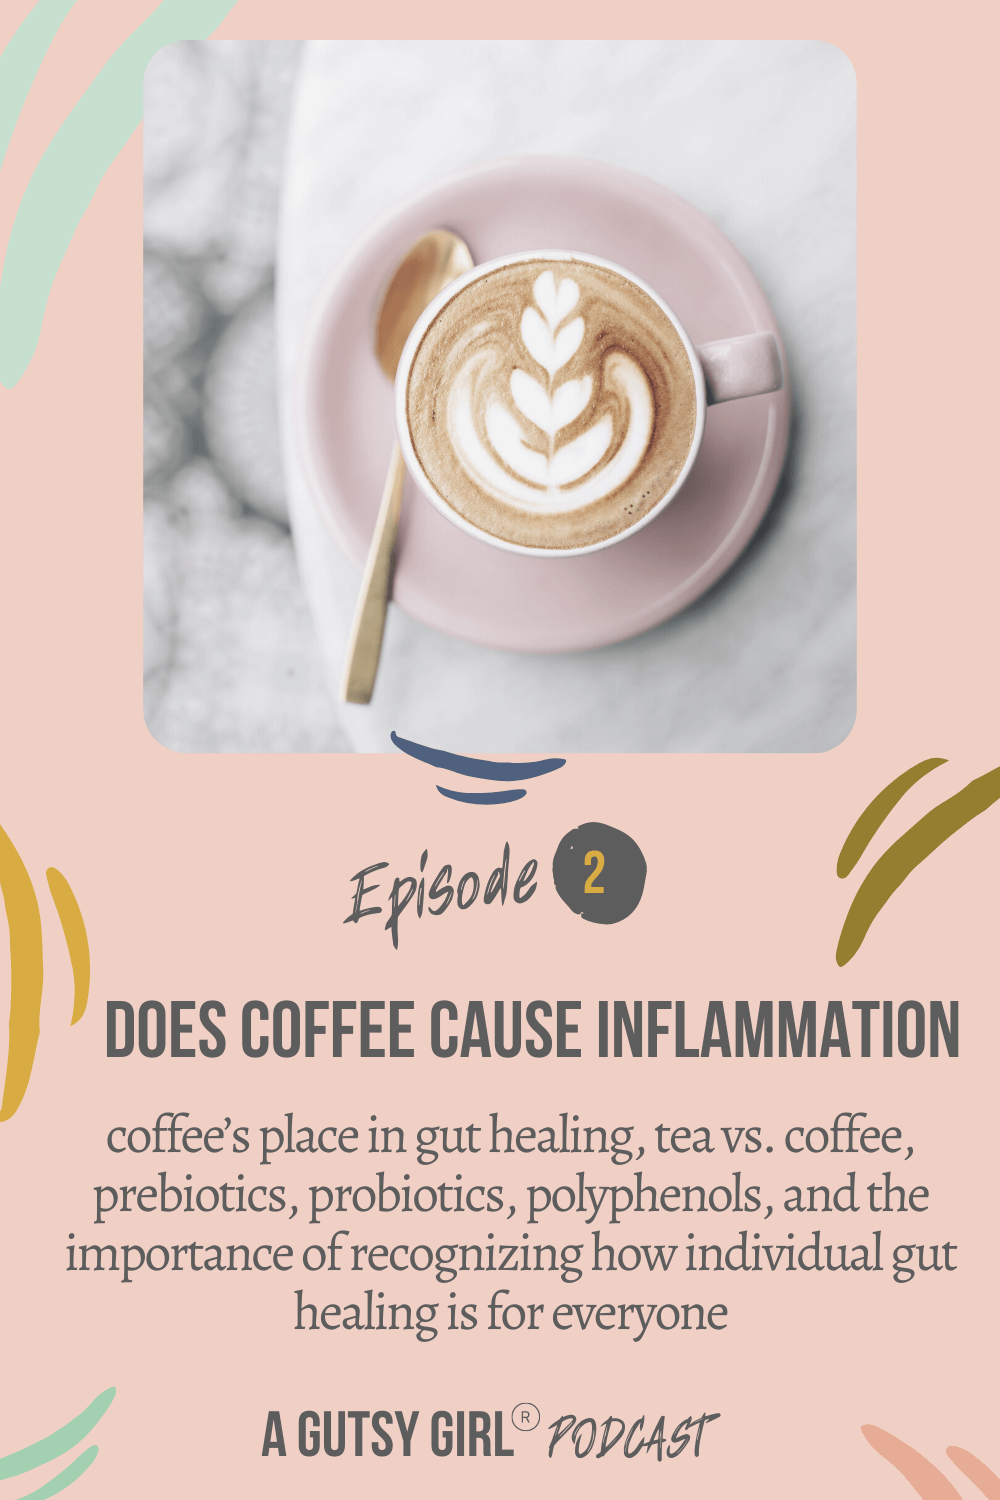 A Gutsy Girl podcast episode 2 Does Coffee Cause Inflammation agutsygirl.com #agutsygirl #healthpodcast #wellnesspodcast #coffee